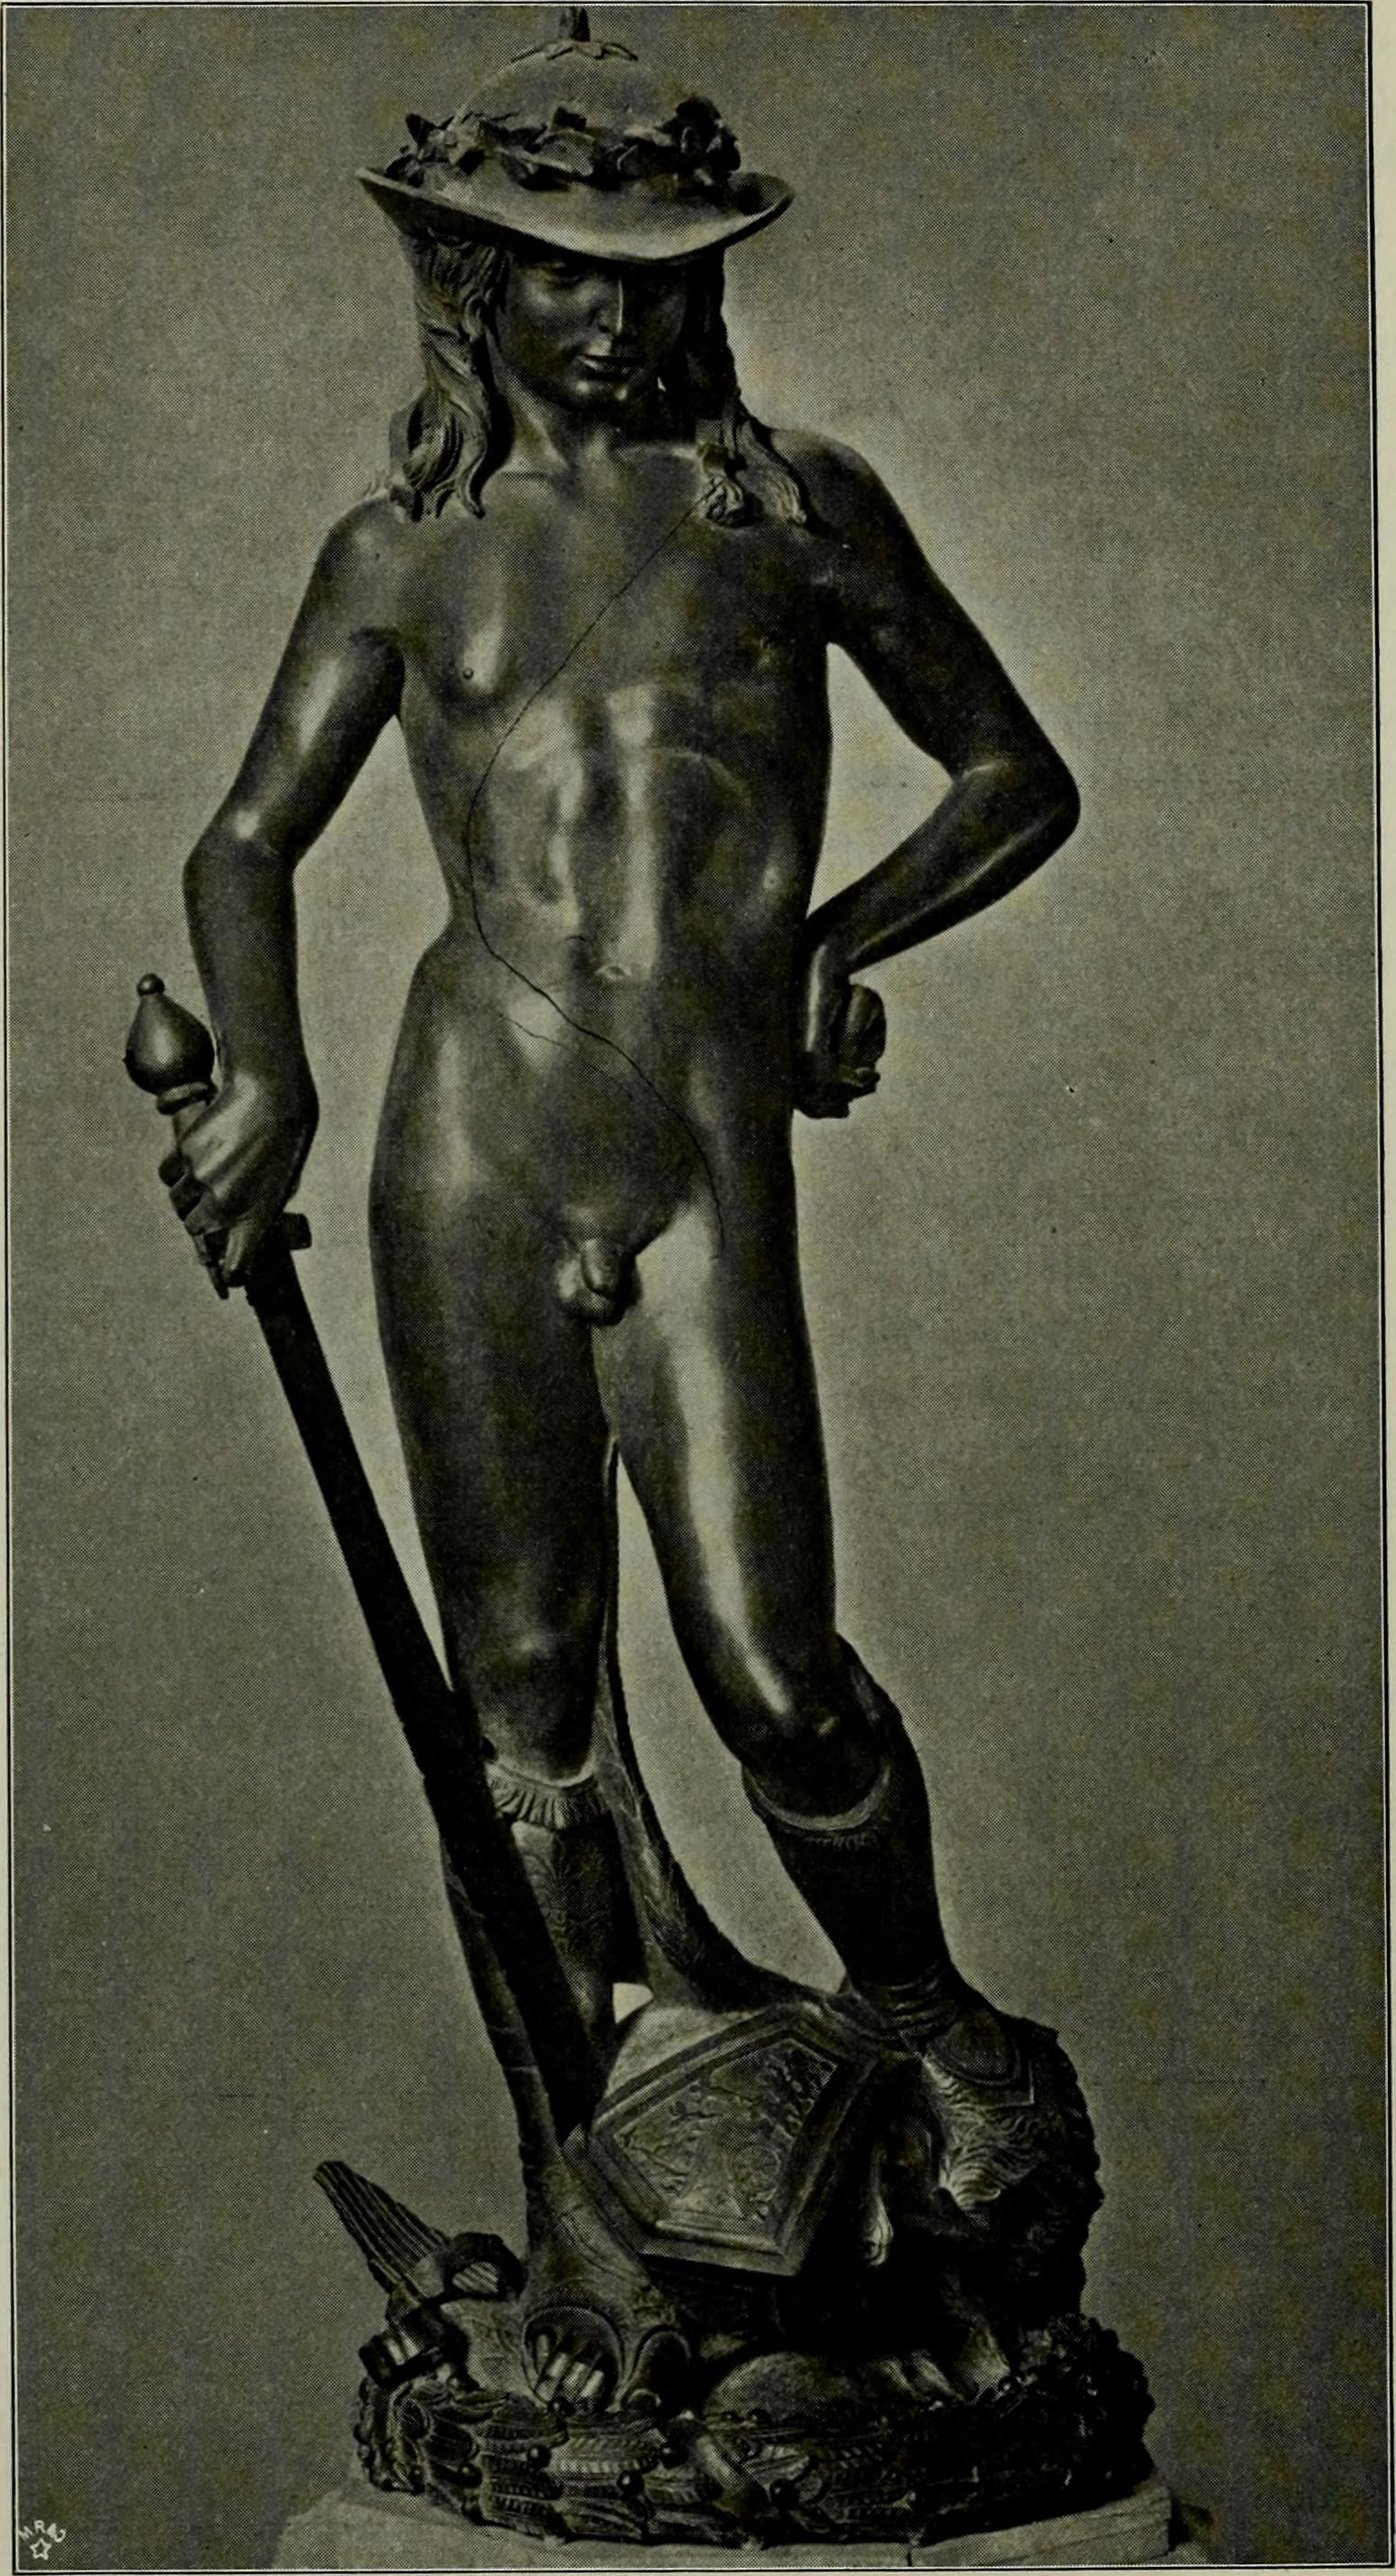 erotic male sculpture in art history, David (Donatello) (1430–1440). This fragile young man with elegant boots and a crazy looking hat is holding a sword in a swirling majestic posture.